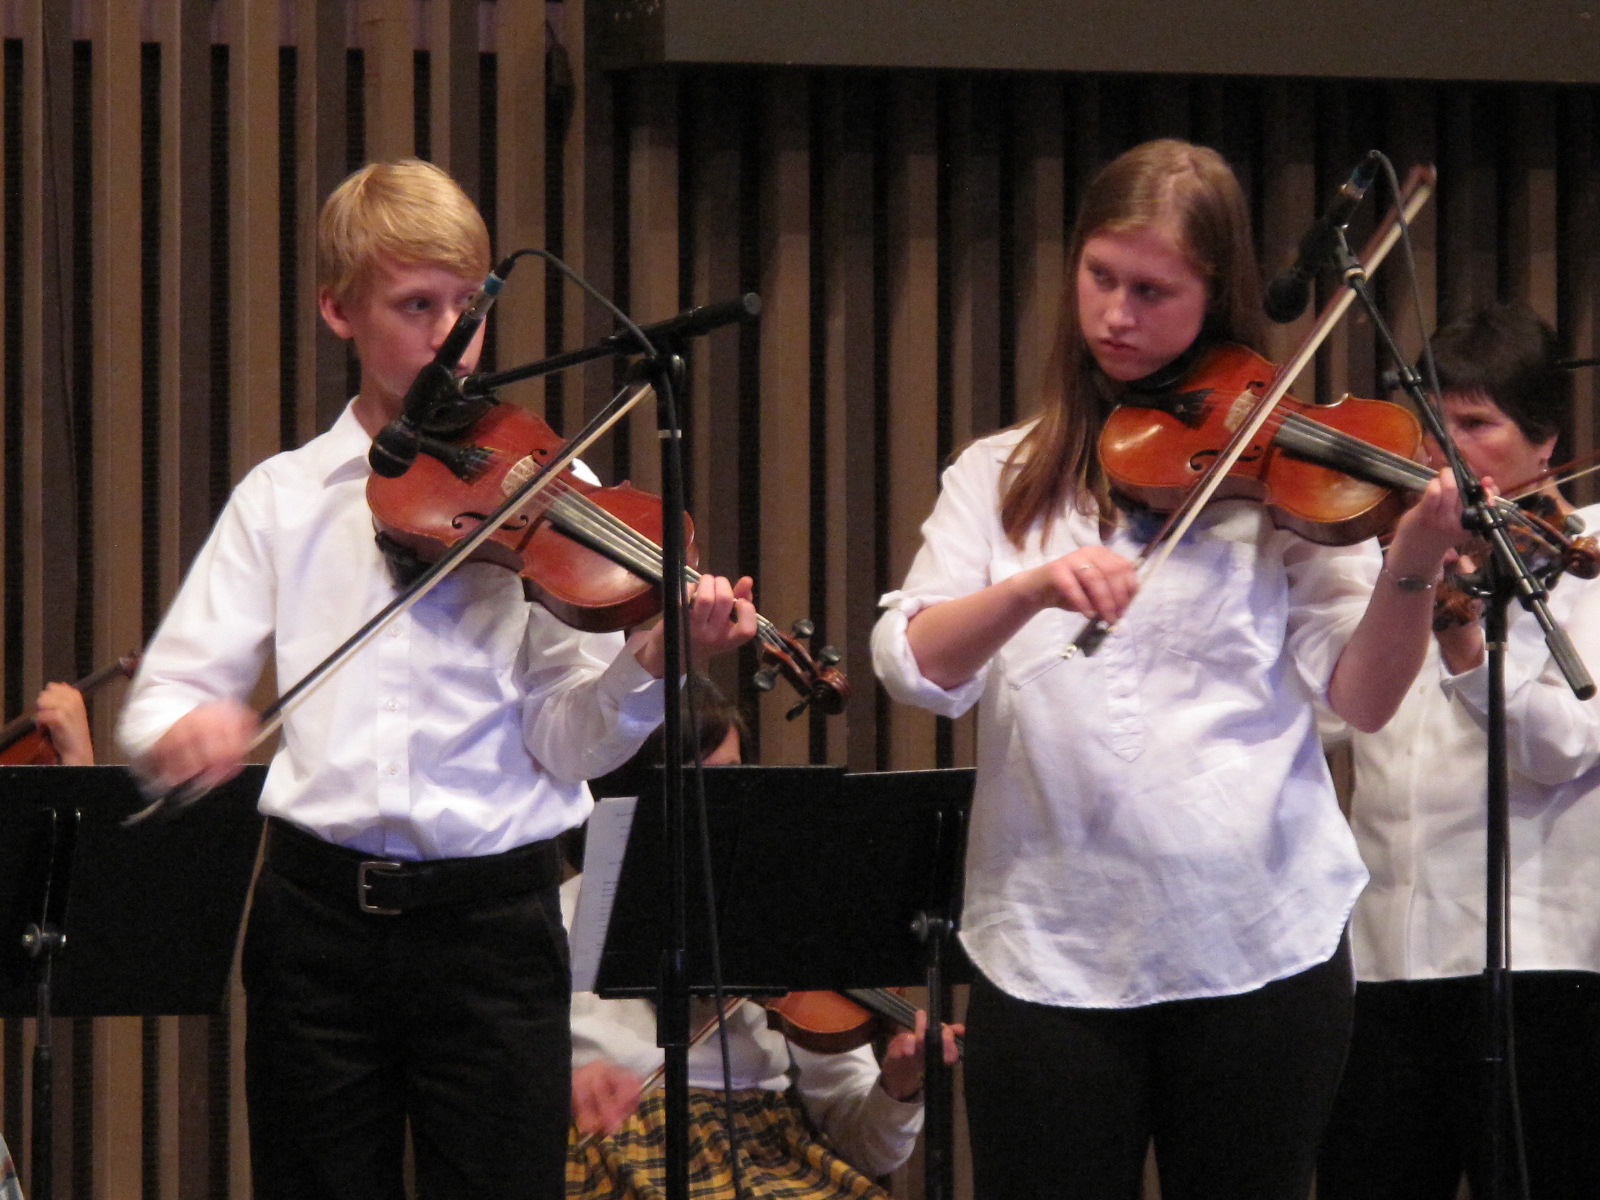 Evan and Elise- fiddle away, then give the audience a special treat by their group,  "Hot Cider".